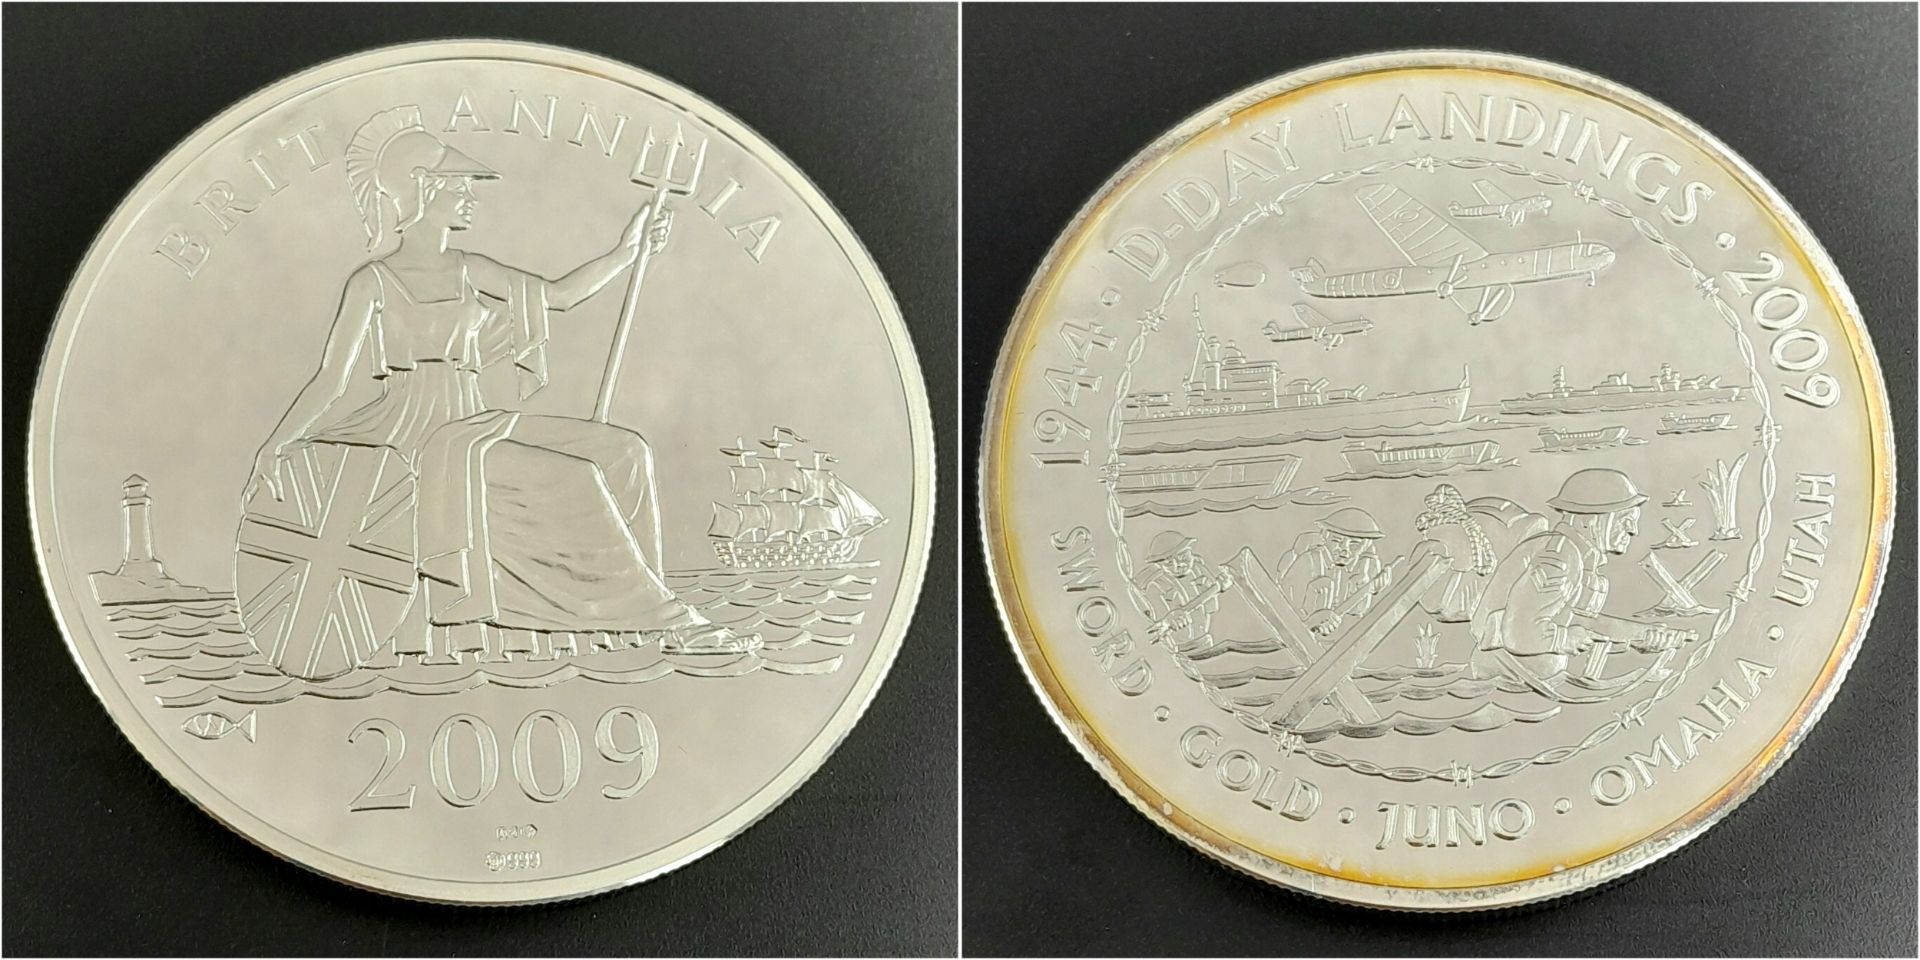 A Mint, Limited Edition, Fine Silver (999) 5 Ounce 2009, 65th Anniversary of the D-Day Landings